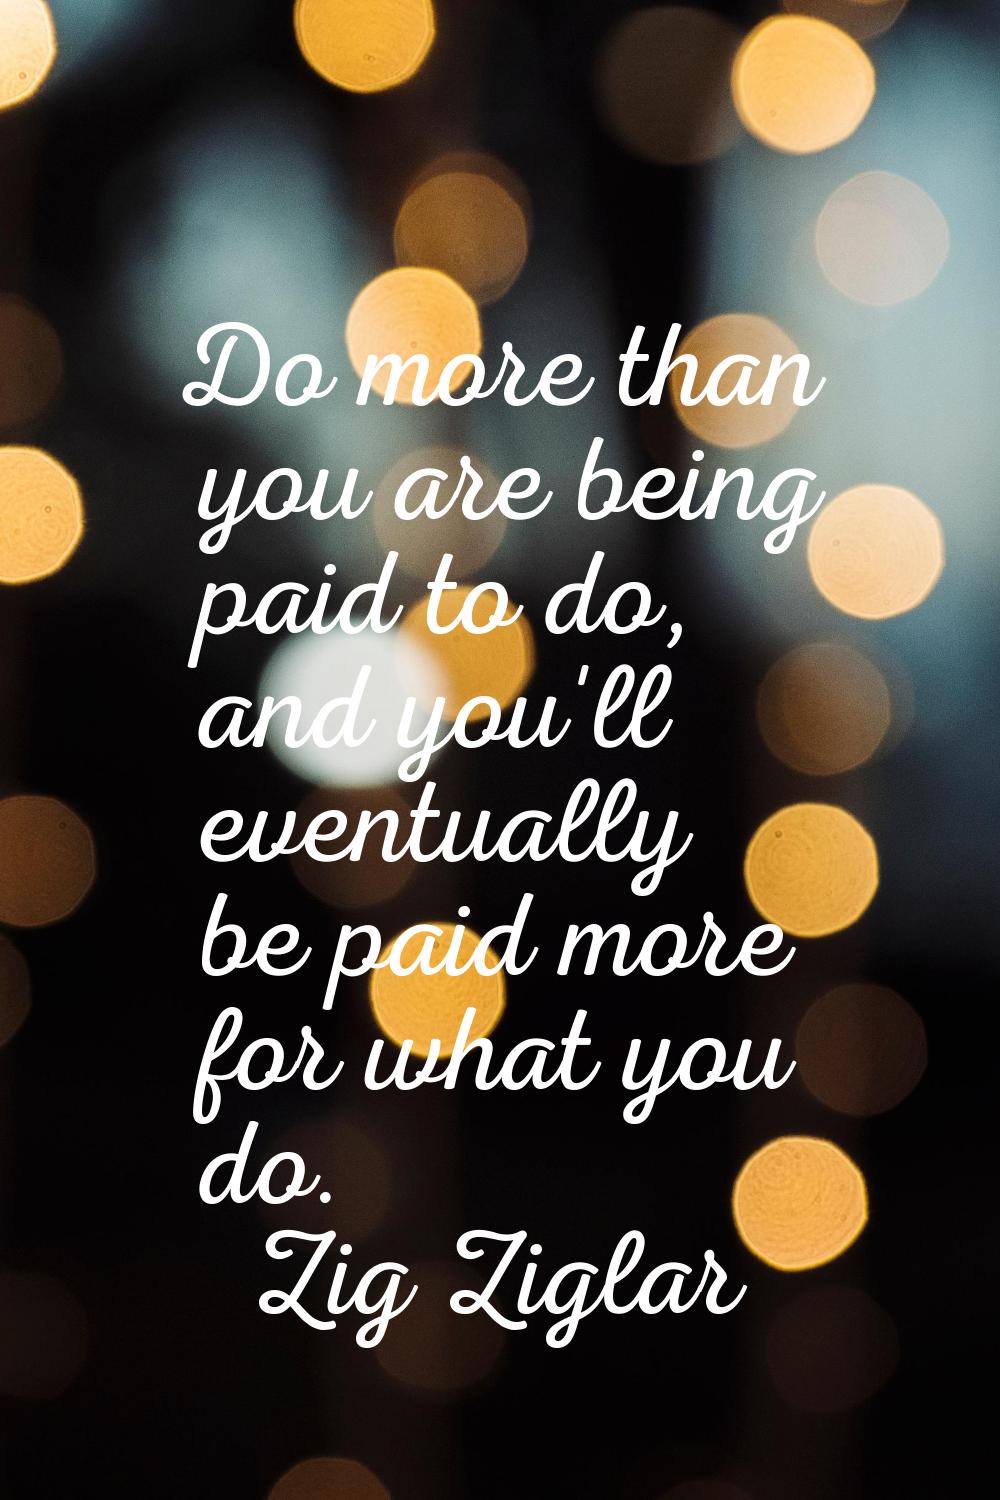 Do more than you are being paid to do, and you'll eventually be paid more for what you do.